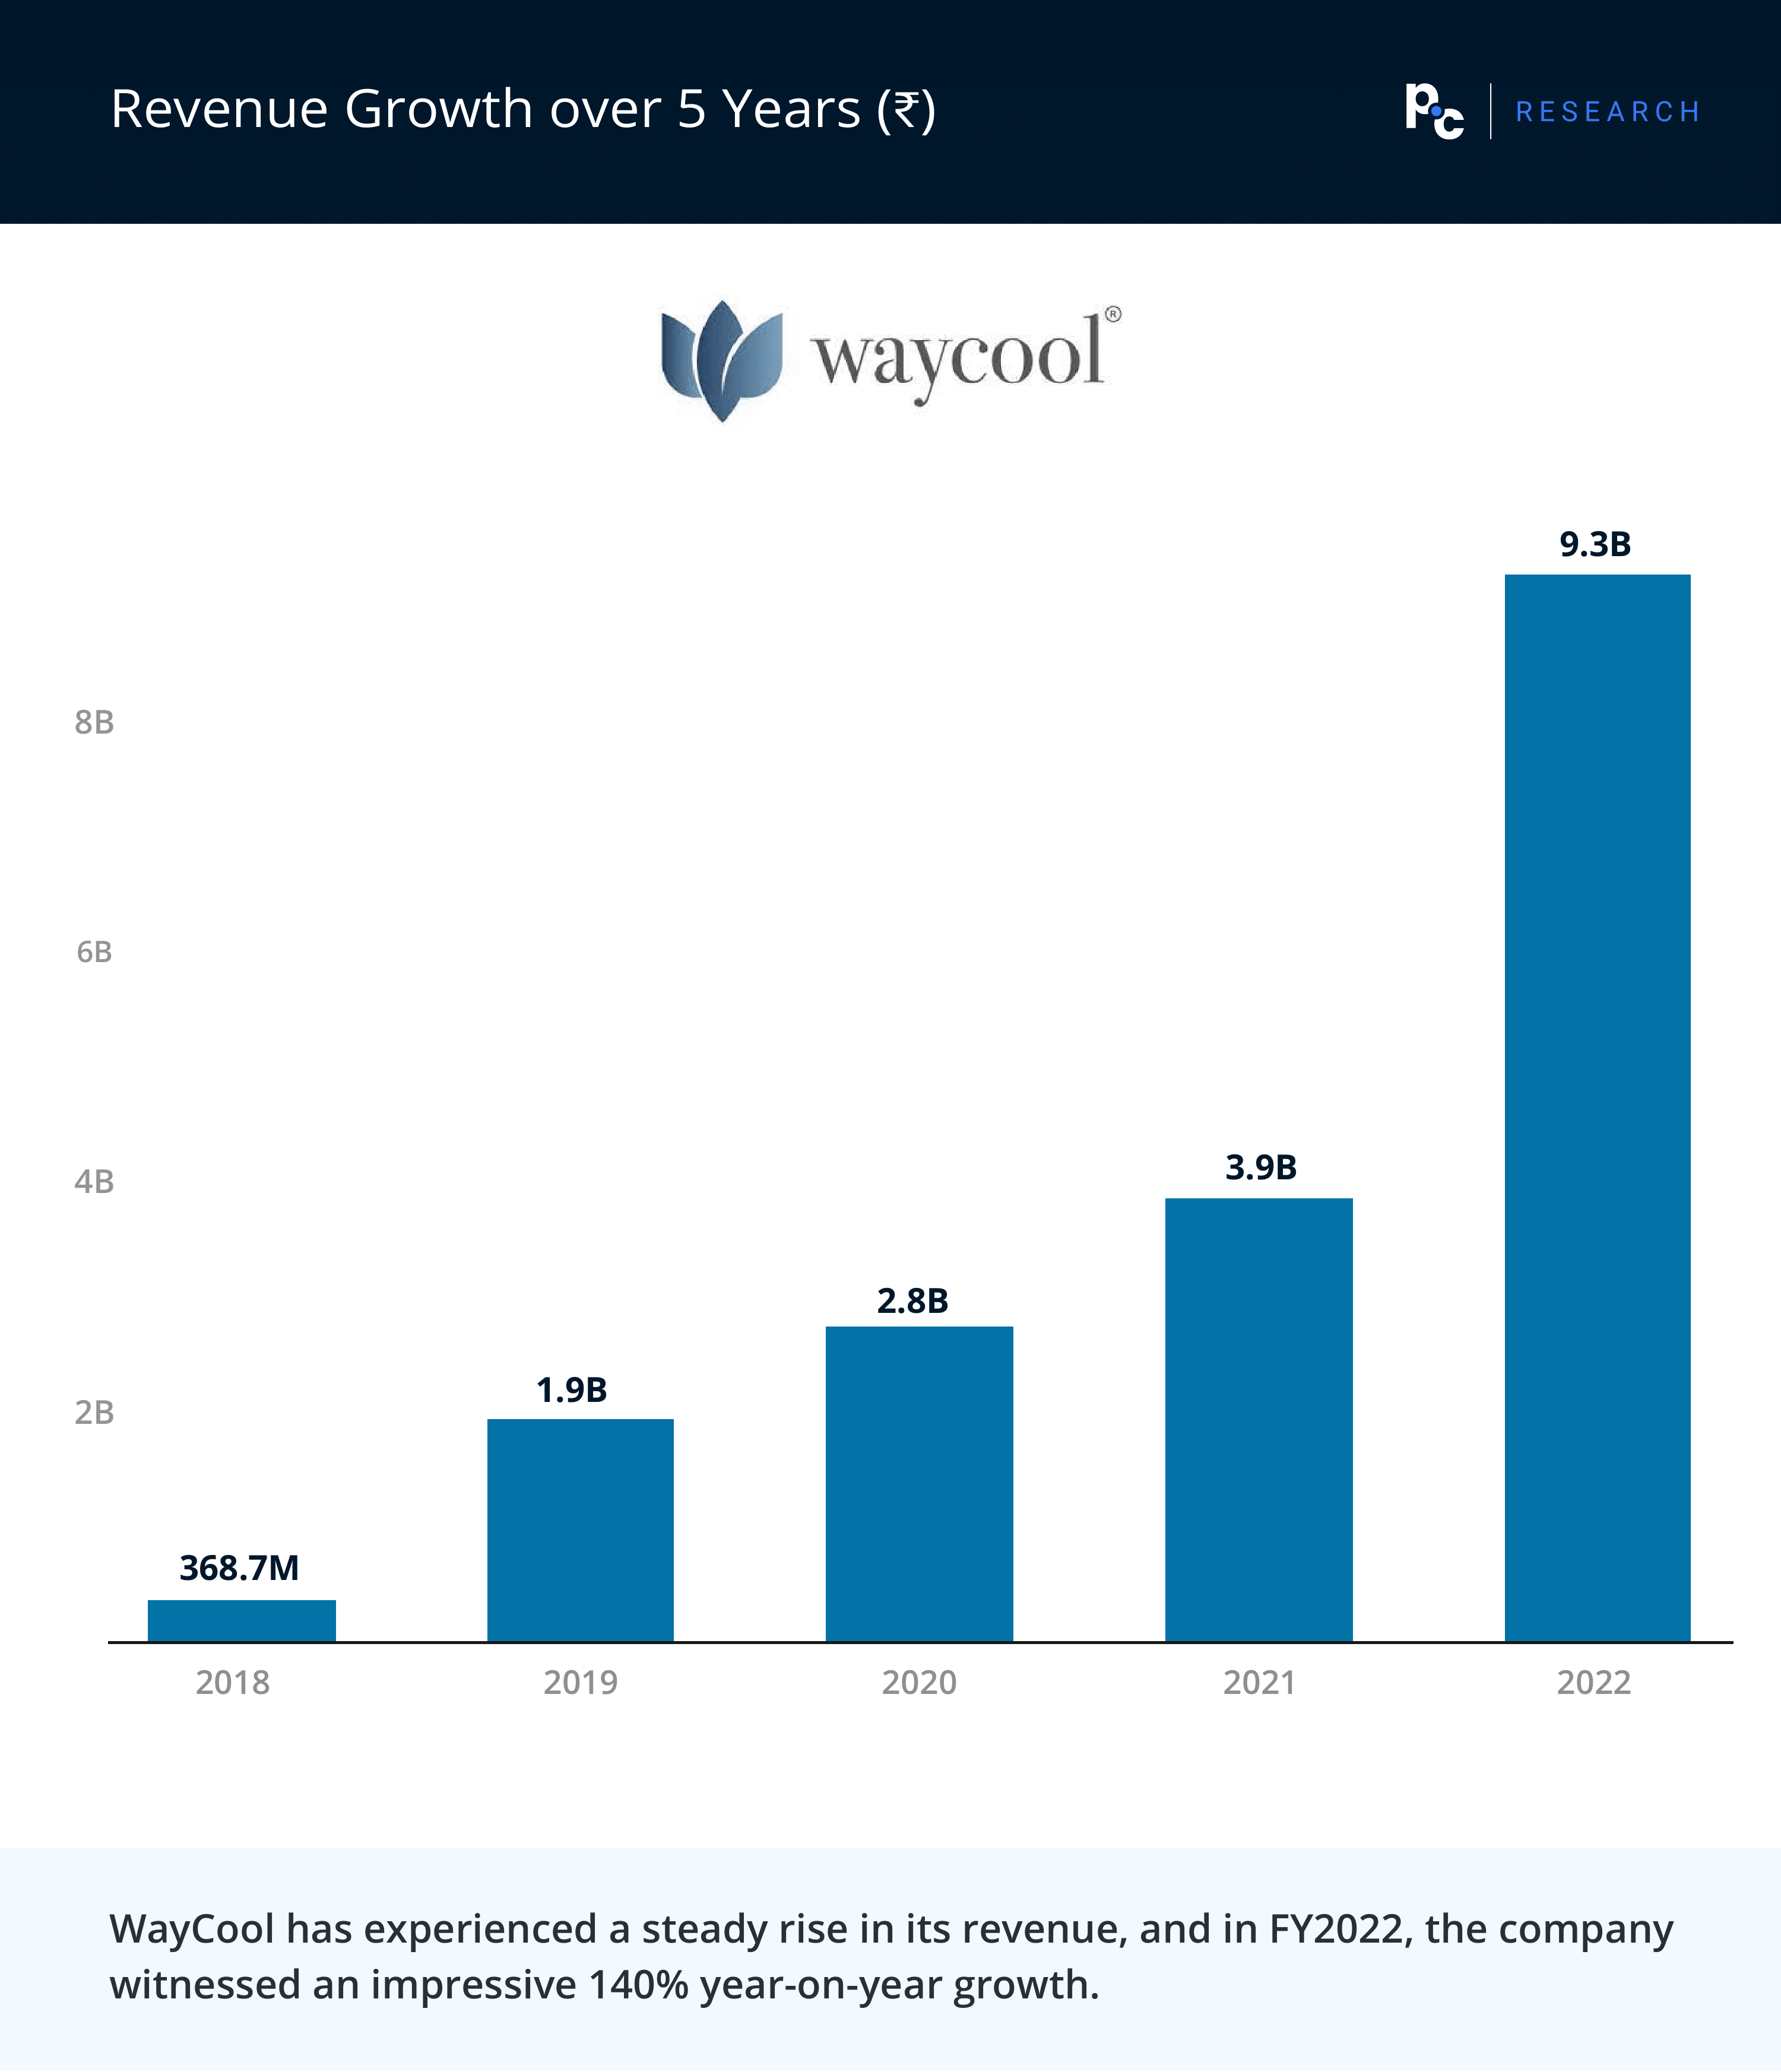 WayCool: Revenue Growth over 5 Years (₹).

WayCool has experienced a steady rise in its revenue, and in FY2022, the company witnessed an impressive 140% year-on-year growth.